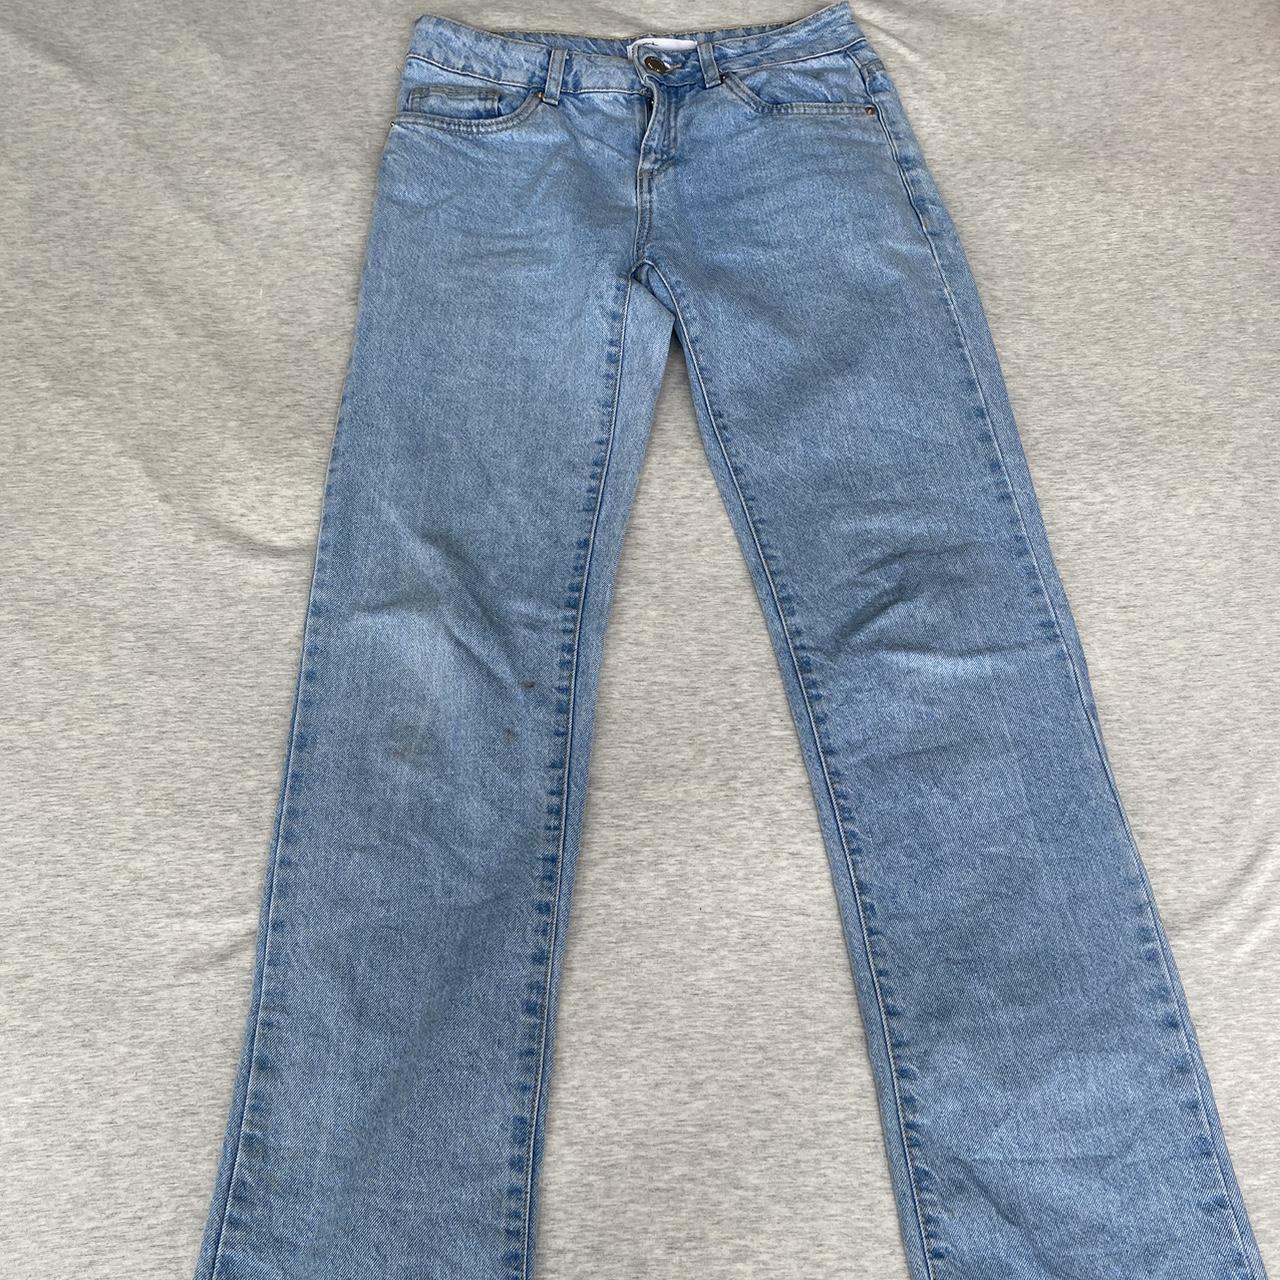 supre low rise jeans size 6 very small stain but... - Depop